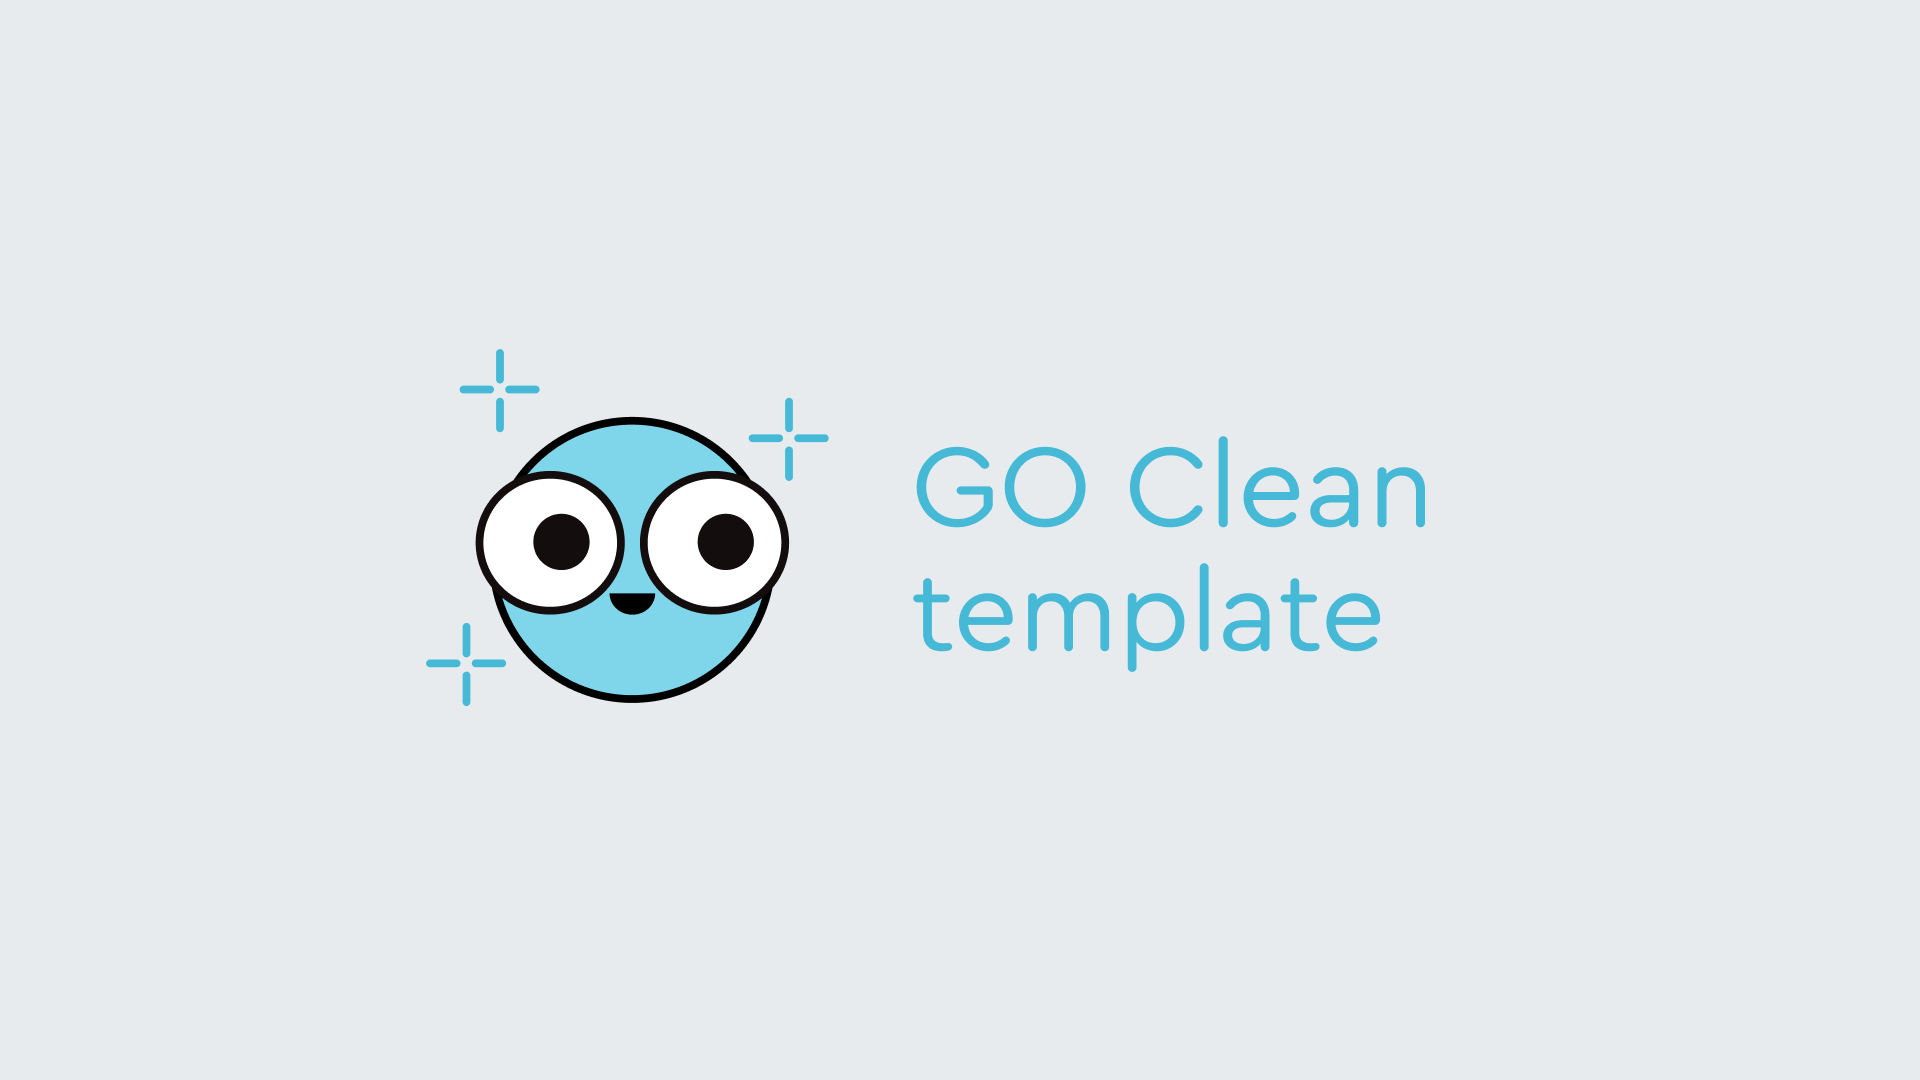 Go-clean-template is a Golang template project based on Robert 